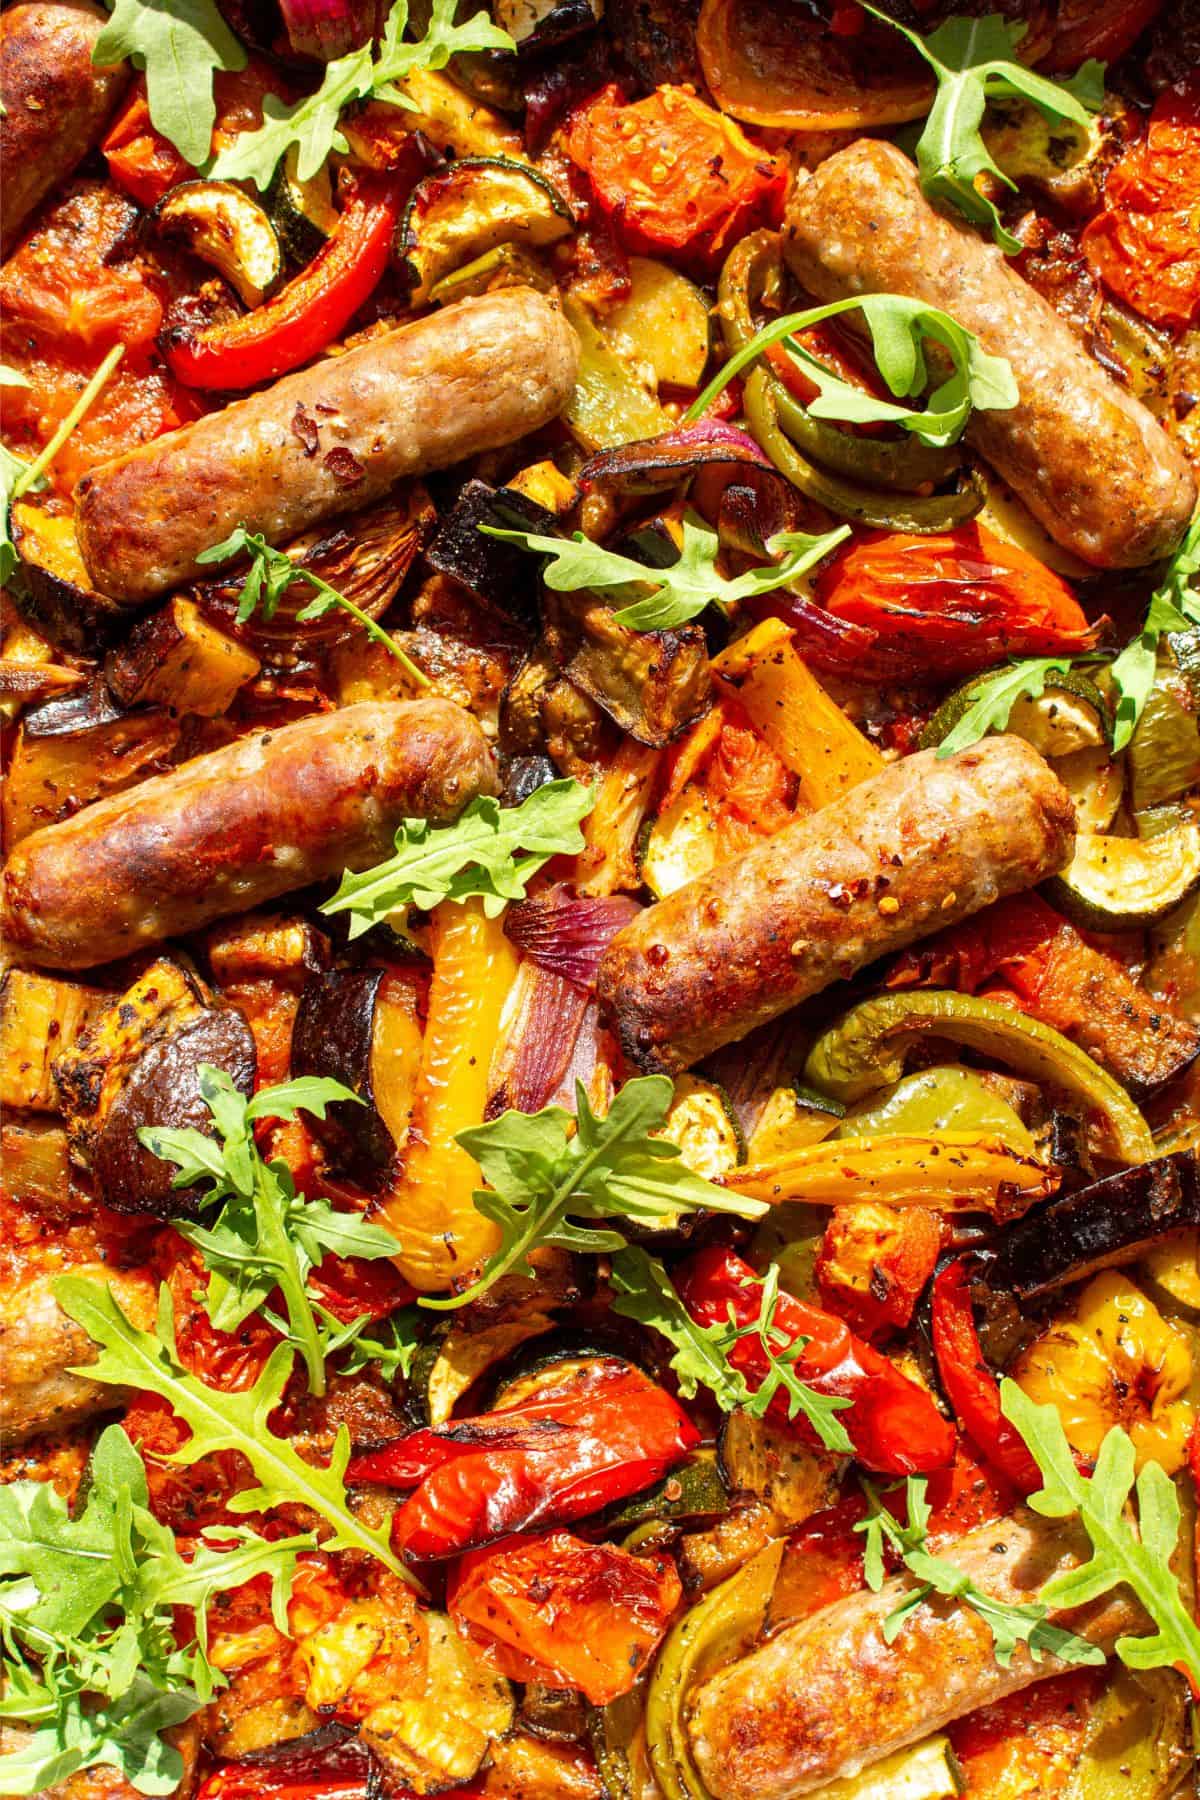 close up of roasted sausages and vegetables (peppers, courgettes, red onion and courgettes) in stainless steel baking tray.